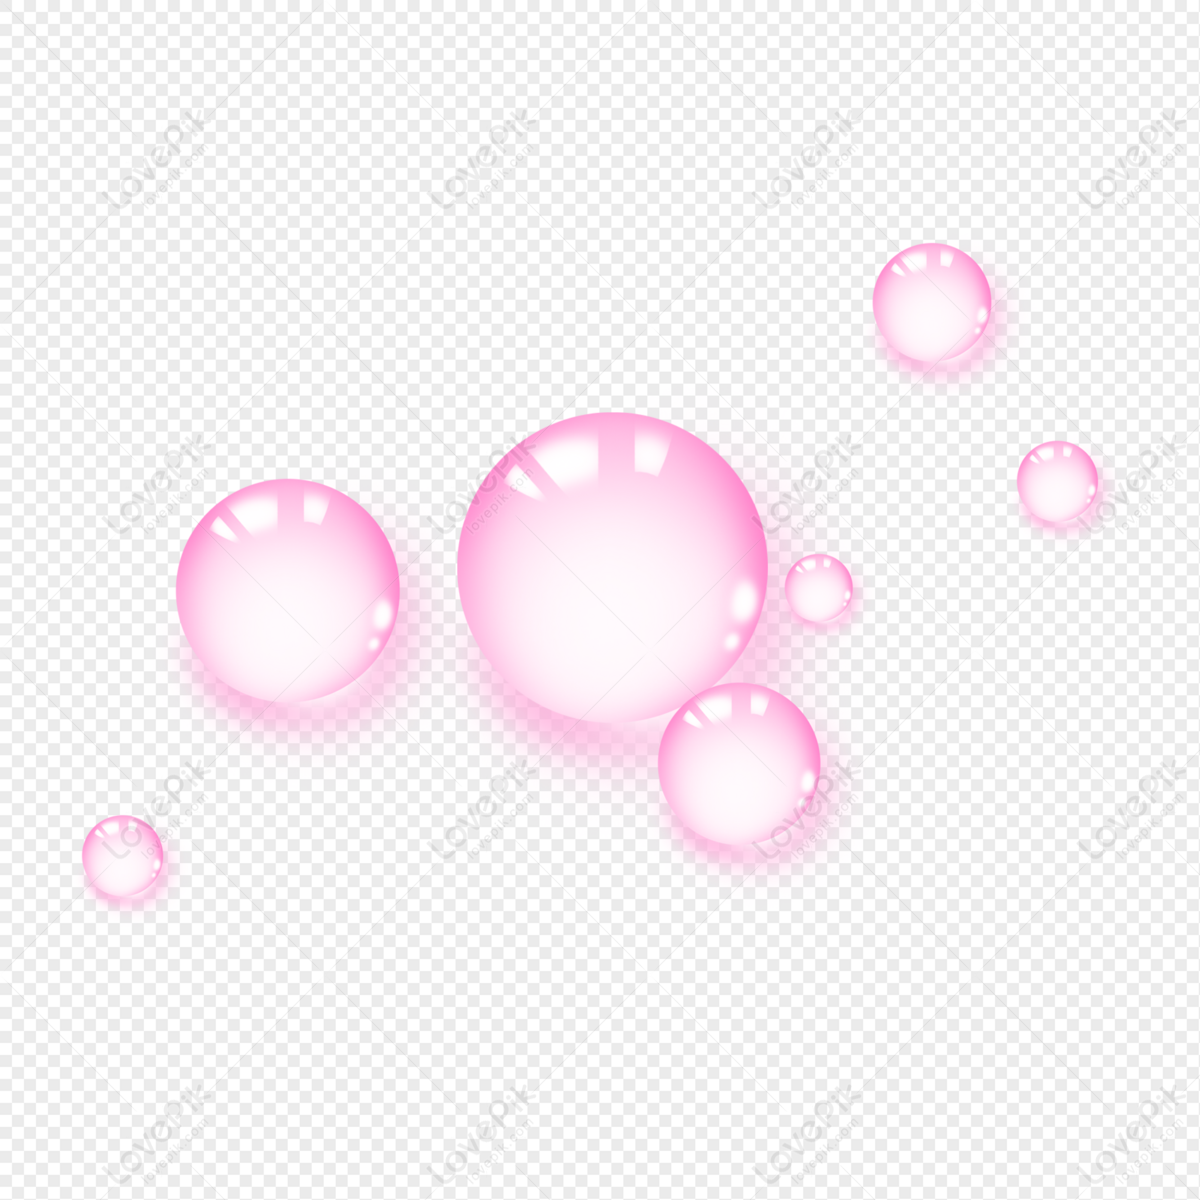 Pink Round Bubble PNG Image And Clipart Image For Free Download - Lovepik |  401497358